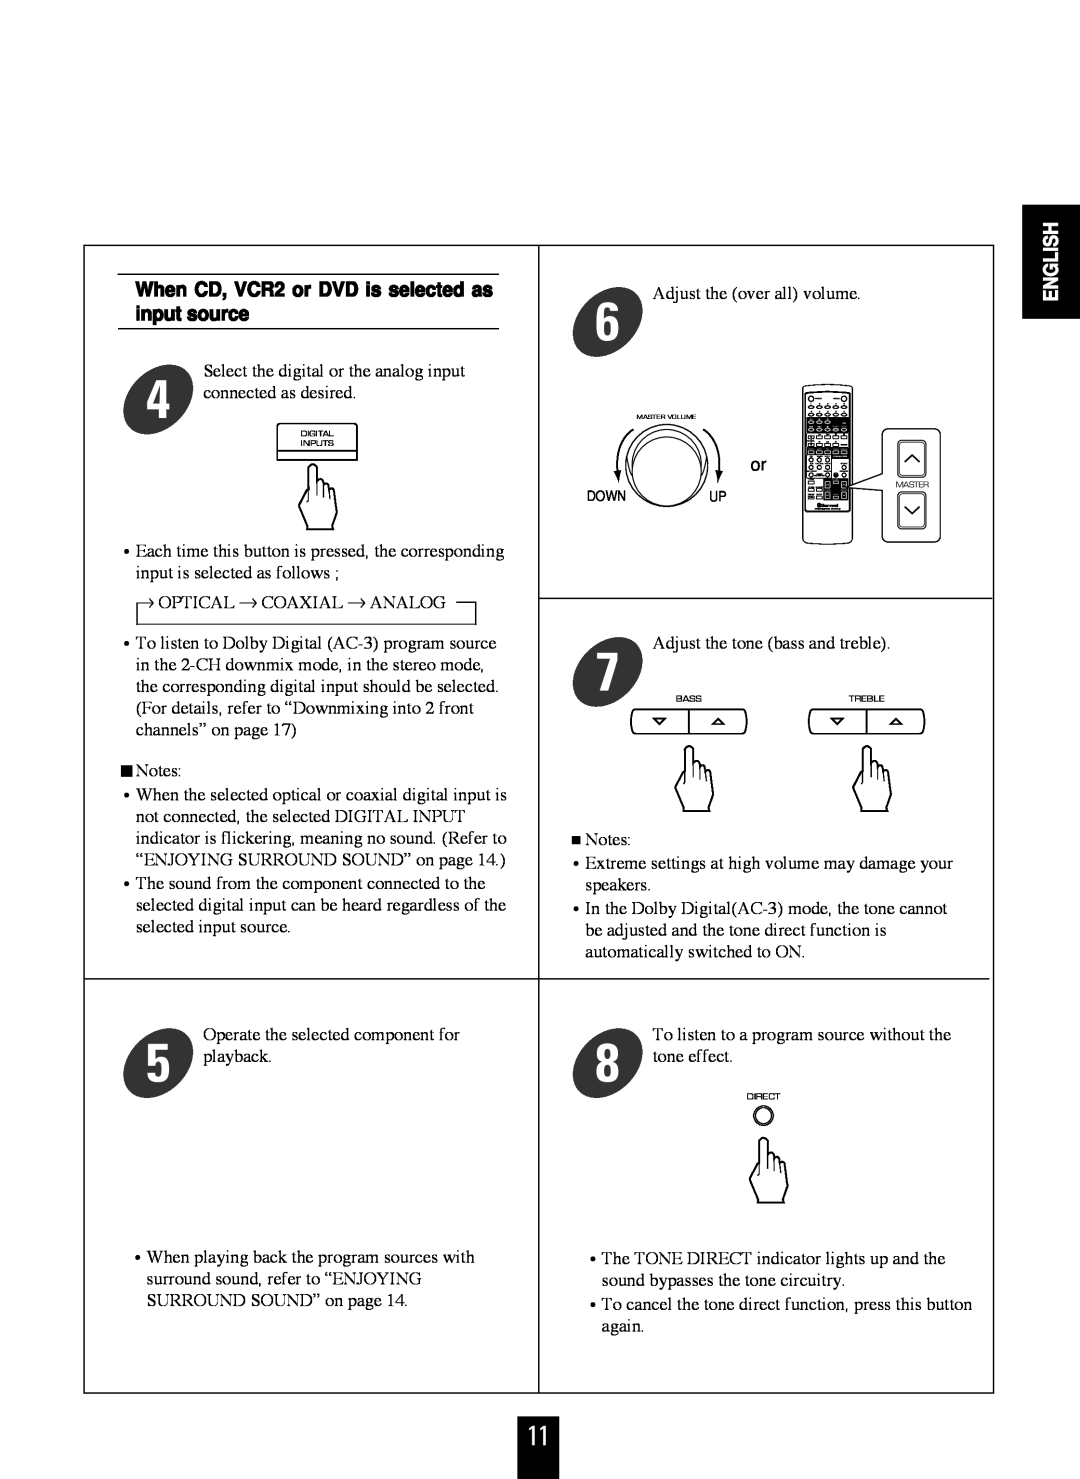 Sherwood RVD-6090R operating instructions When CD, VCR2 or DVD is selected as, input source, English 